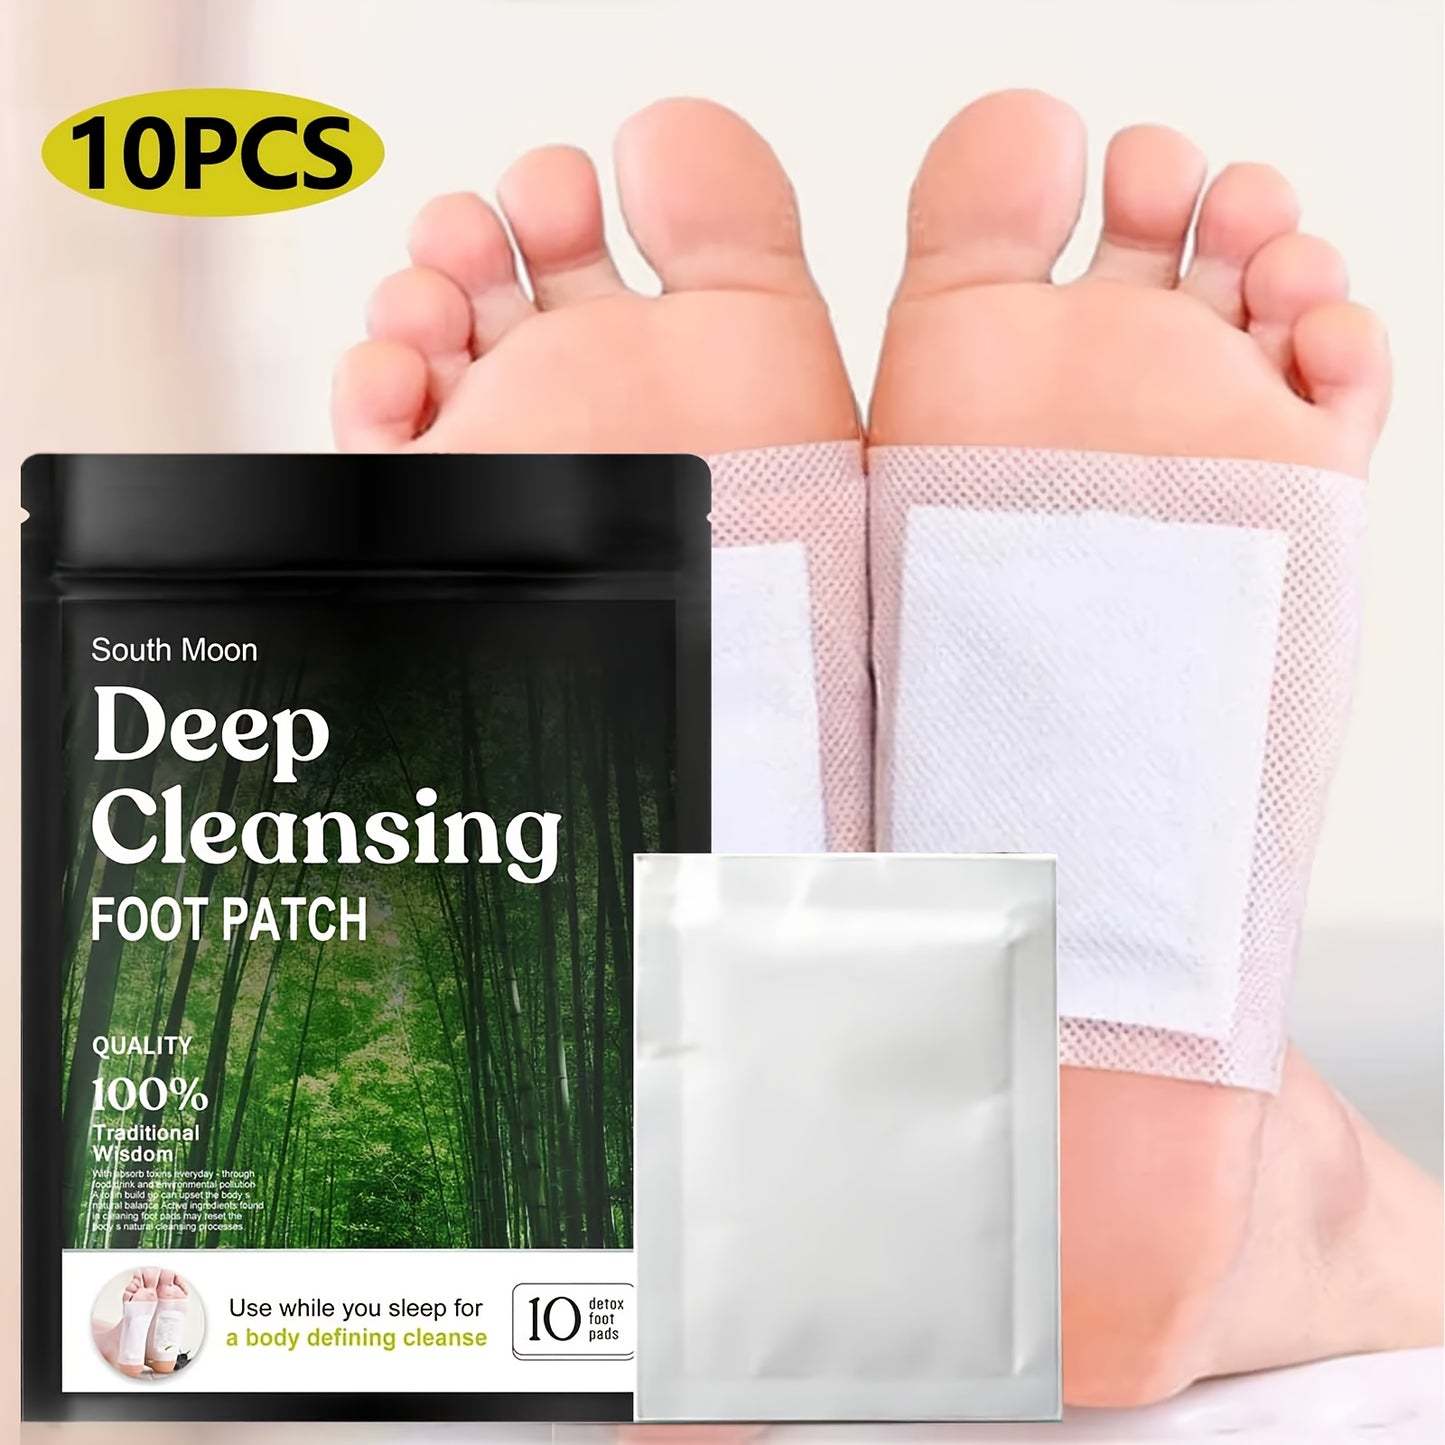 Deep Cleansing Detox Foot Pads to Remove Body Toxins